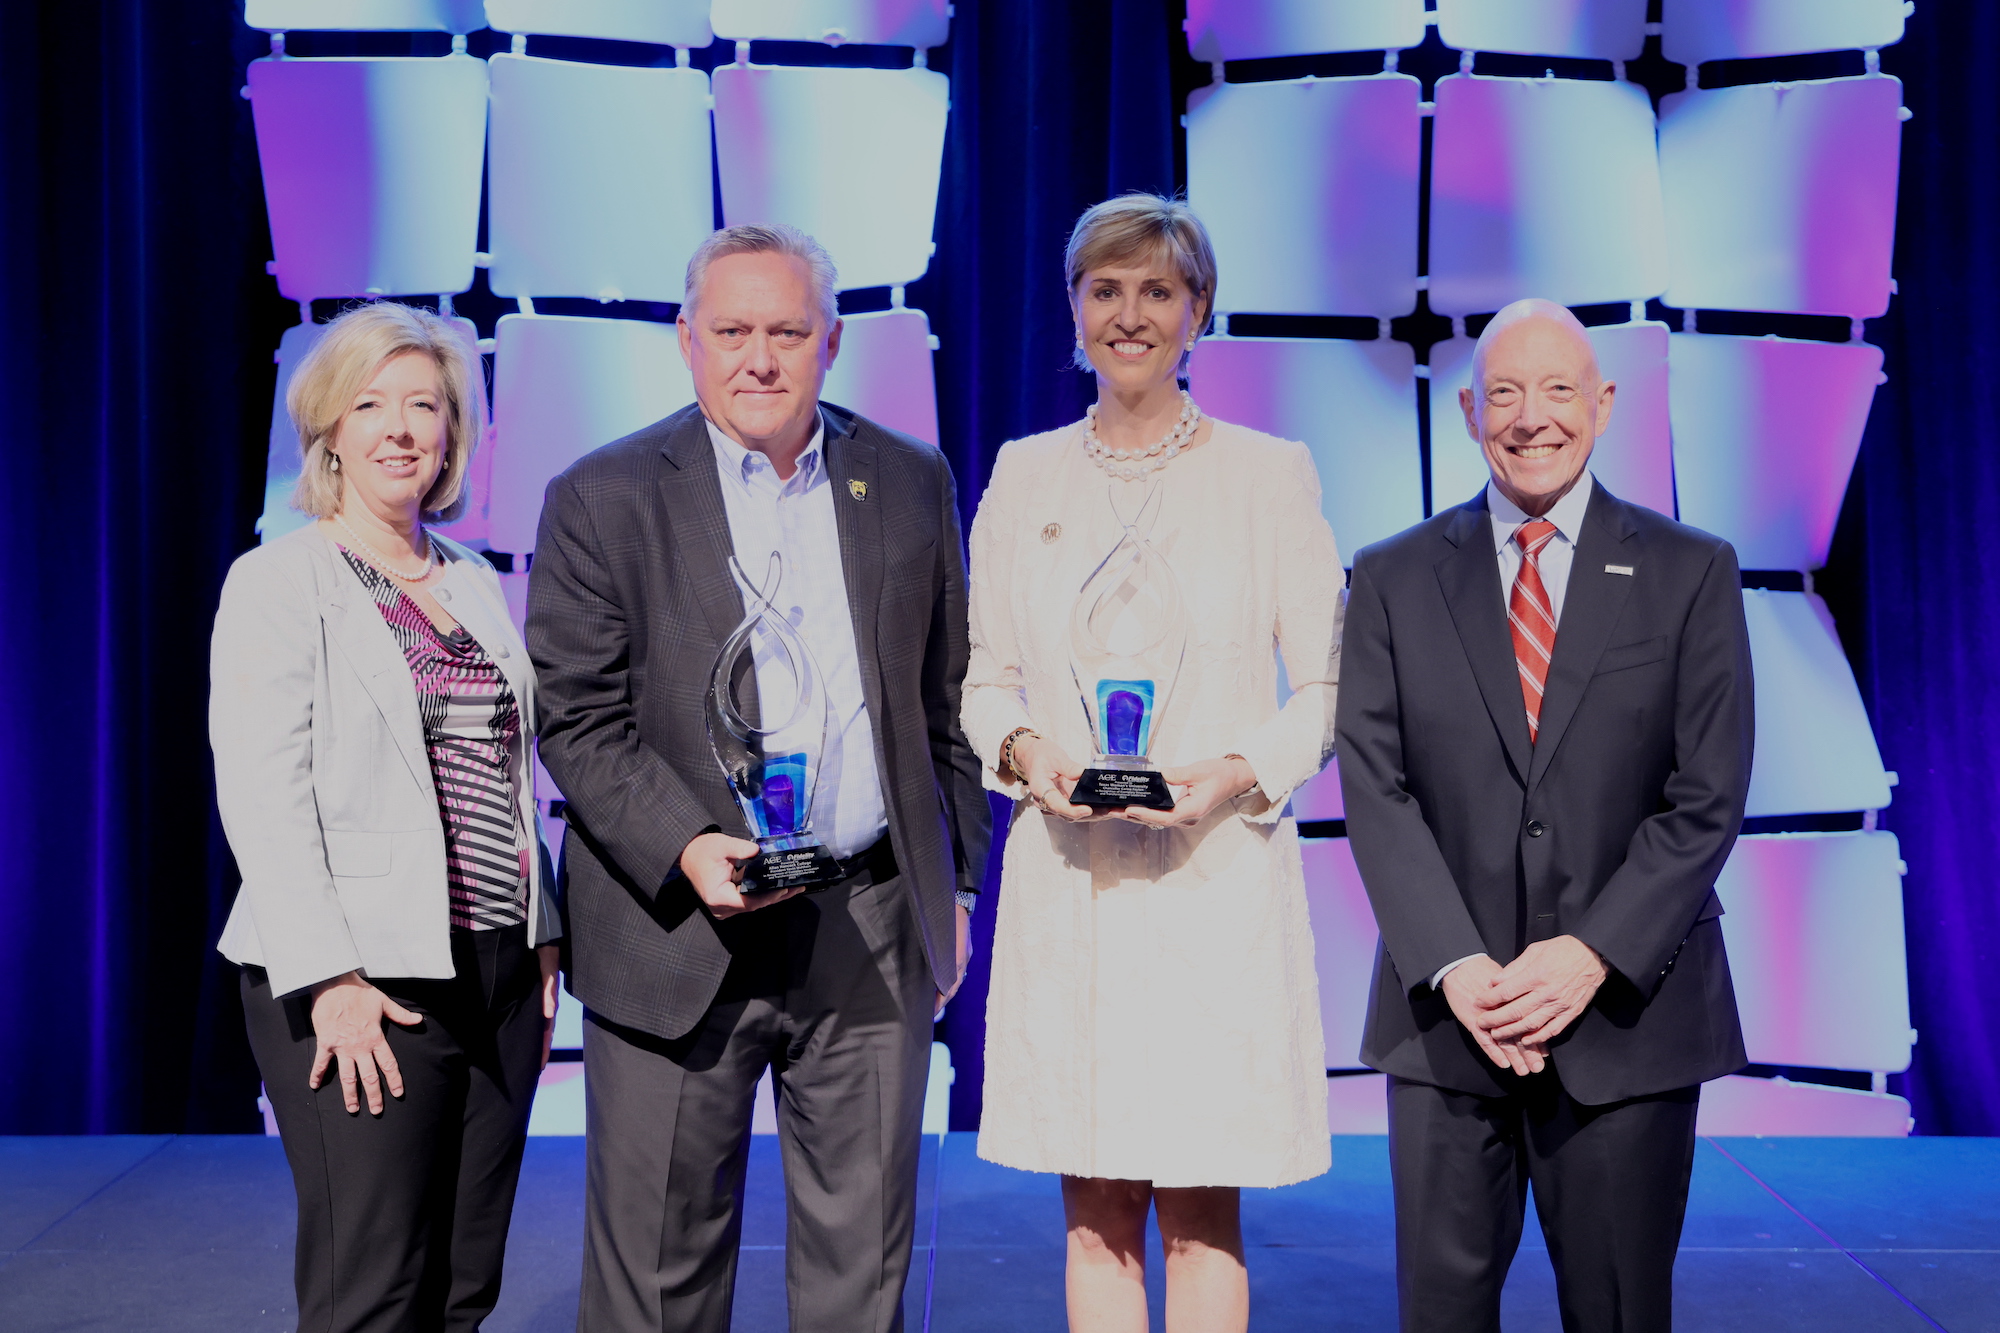 Texas Woman’s University and Allan Hancock College Receive ACE/Fidelity Investments Award for Institutional Transformation